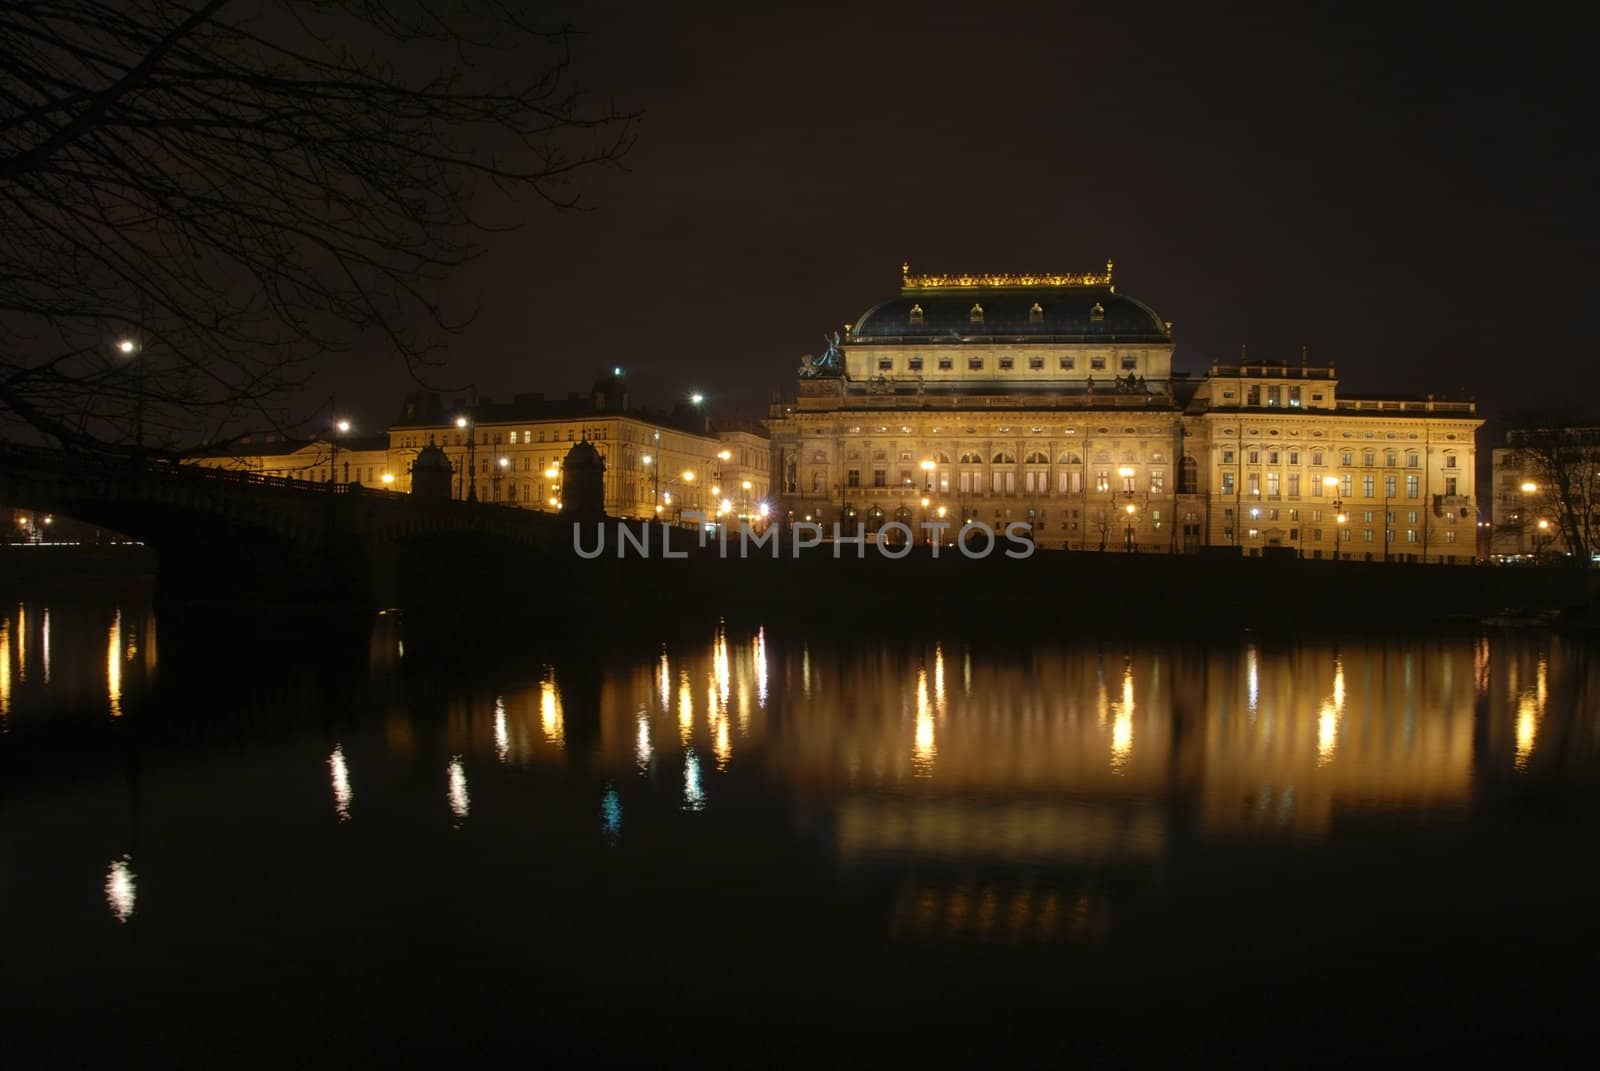 The Czech National Theater in Prague is reflecting after the dusk in the river Vltava